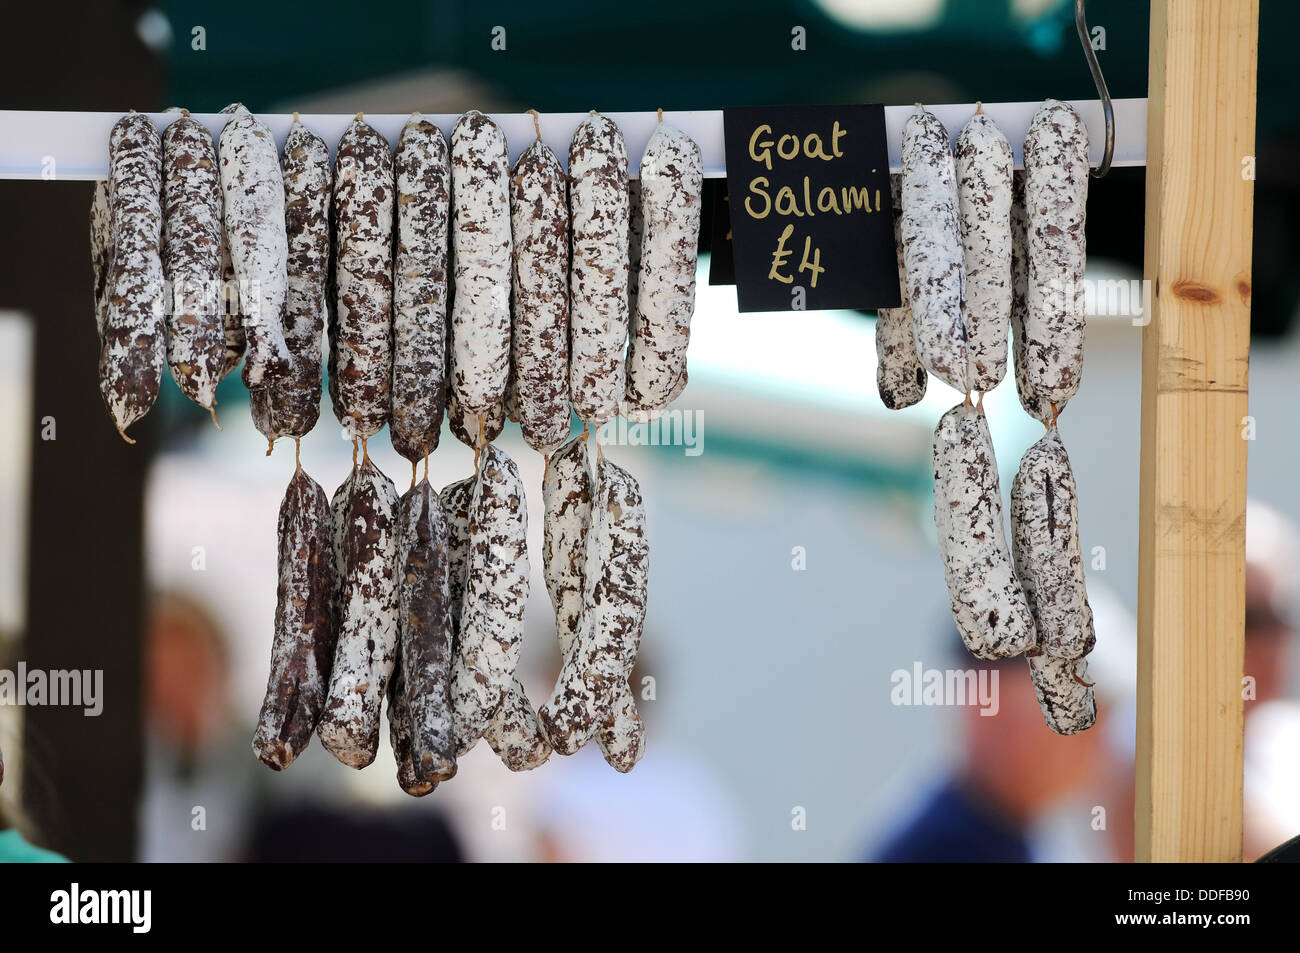 A traditional wooden salami slicer is seen close up on a market stall  during an agricultural and farming fair. Rustic butcher's tool for cutting  cured meats Stock Photo - Alamy